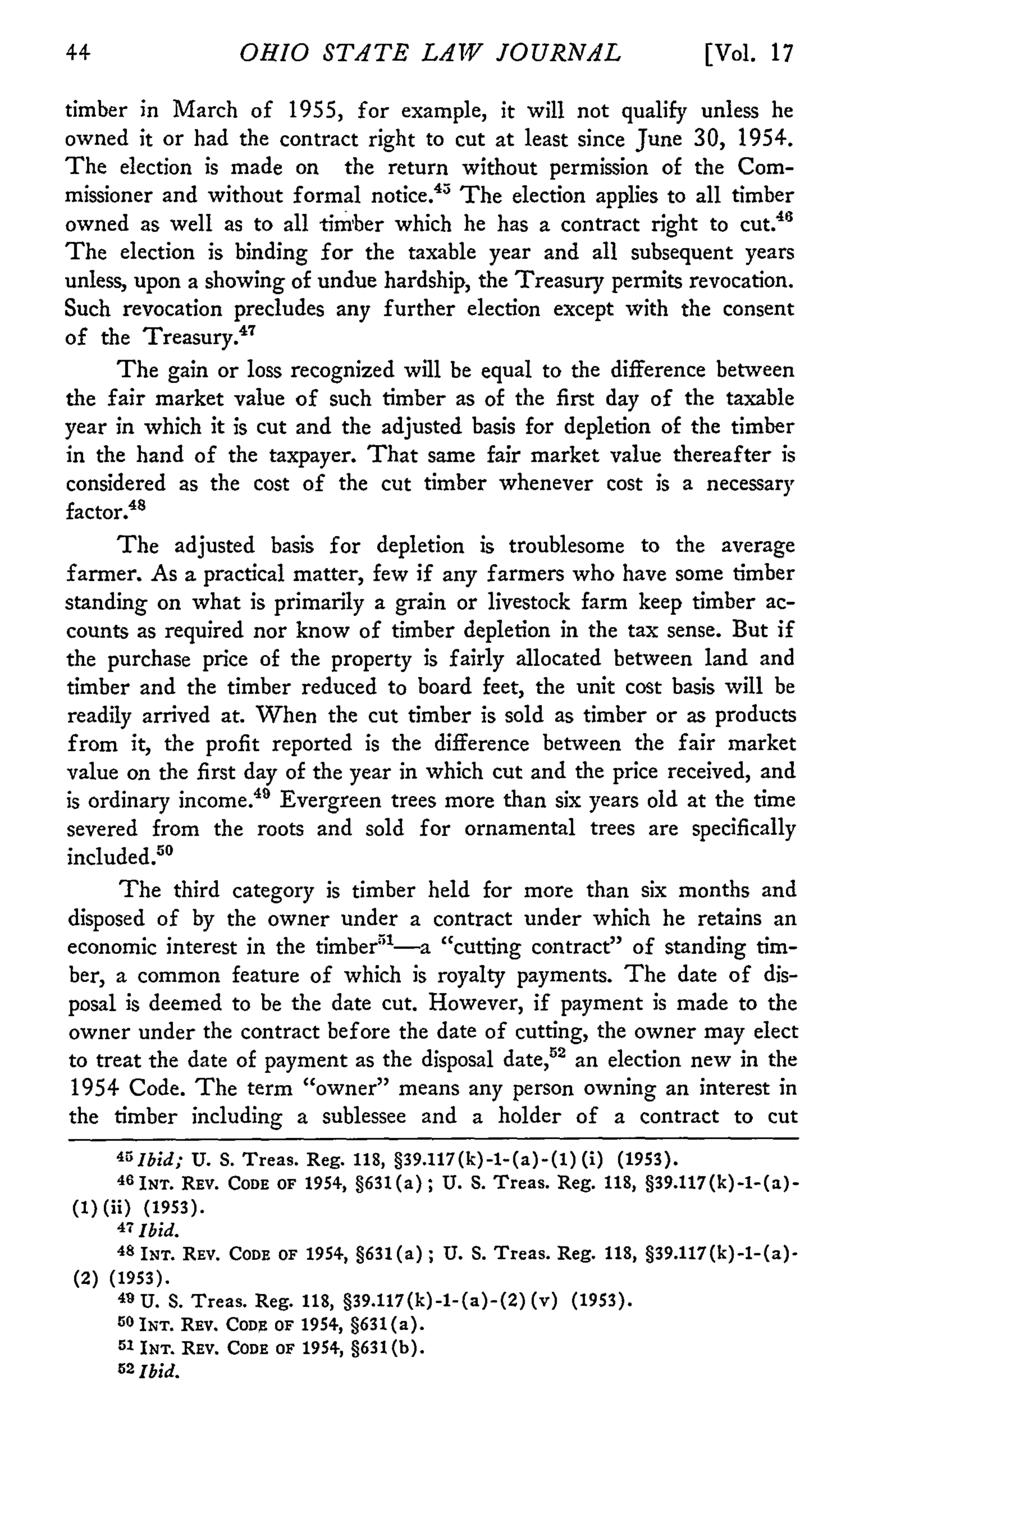 OHIO STATE LAW JOURNAL [Vol. 17 timber in March of 1955, for example, it will not qualify unless he owned it or had the contract right to cut at least since June 30, 1954.